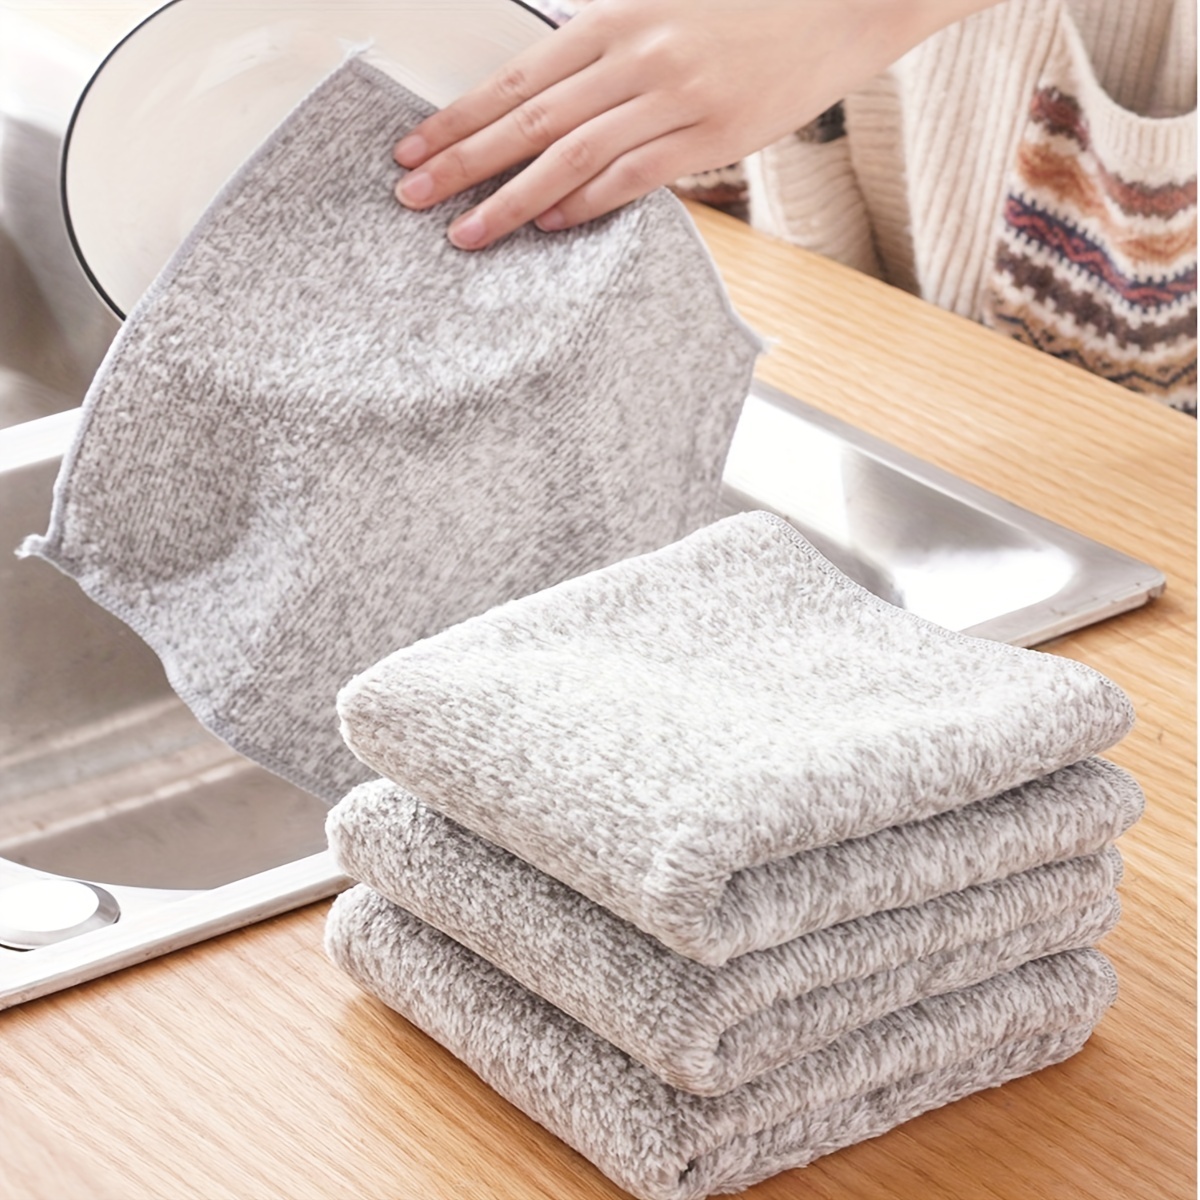 10/20pcs Dishwashing Cloth Kitchen Cleaning Wipes Household Multipurpose  Absorbent Nonstick Oil Fiber Cleaning Cloth